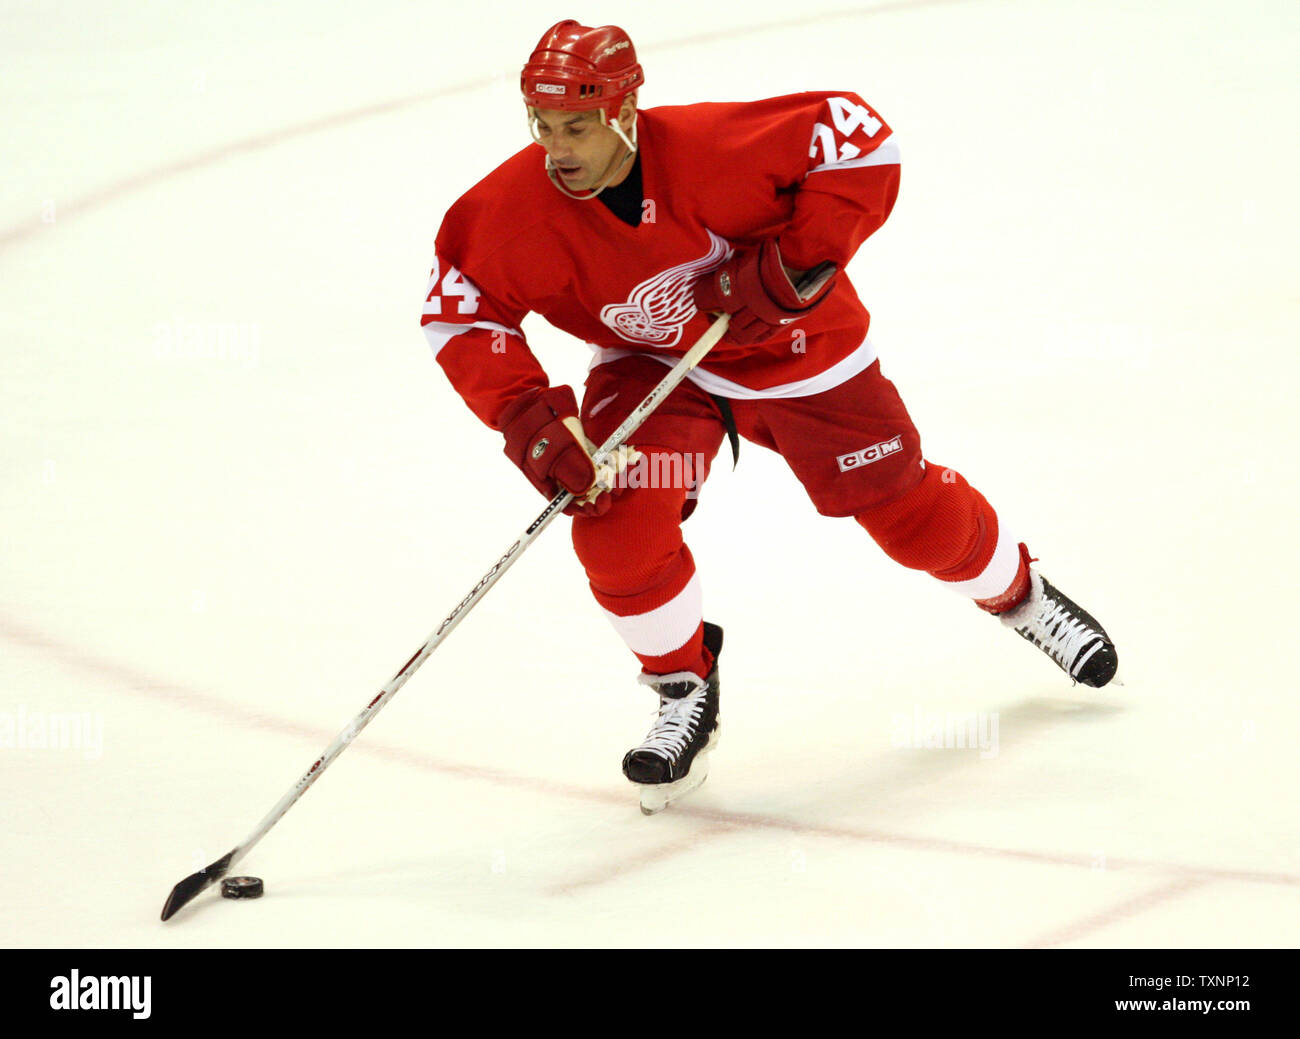 Sports Photo Gallery - Chris Chelios hits 1500 game mark - The Detroit News  Online